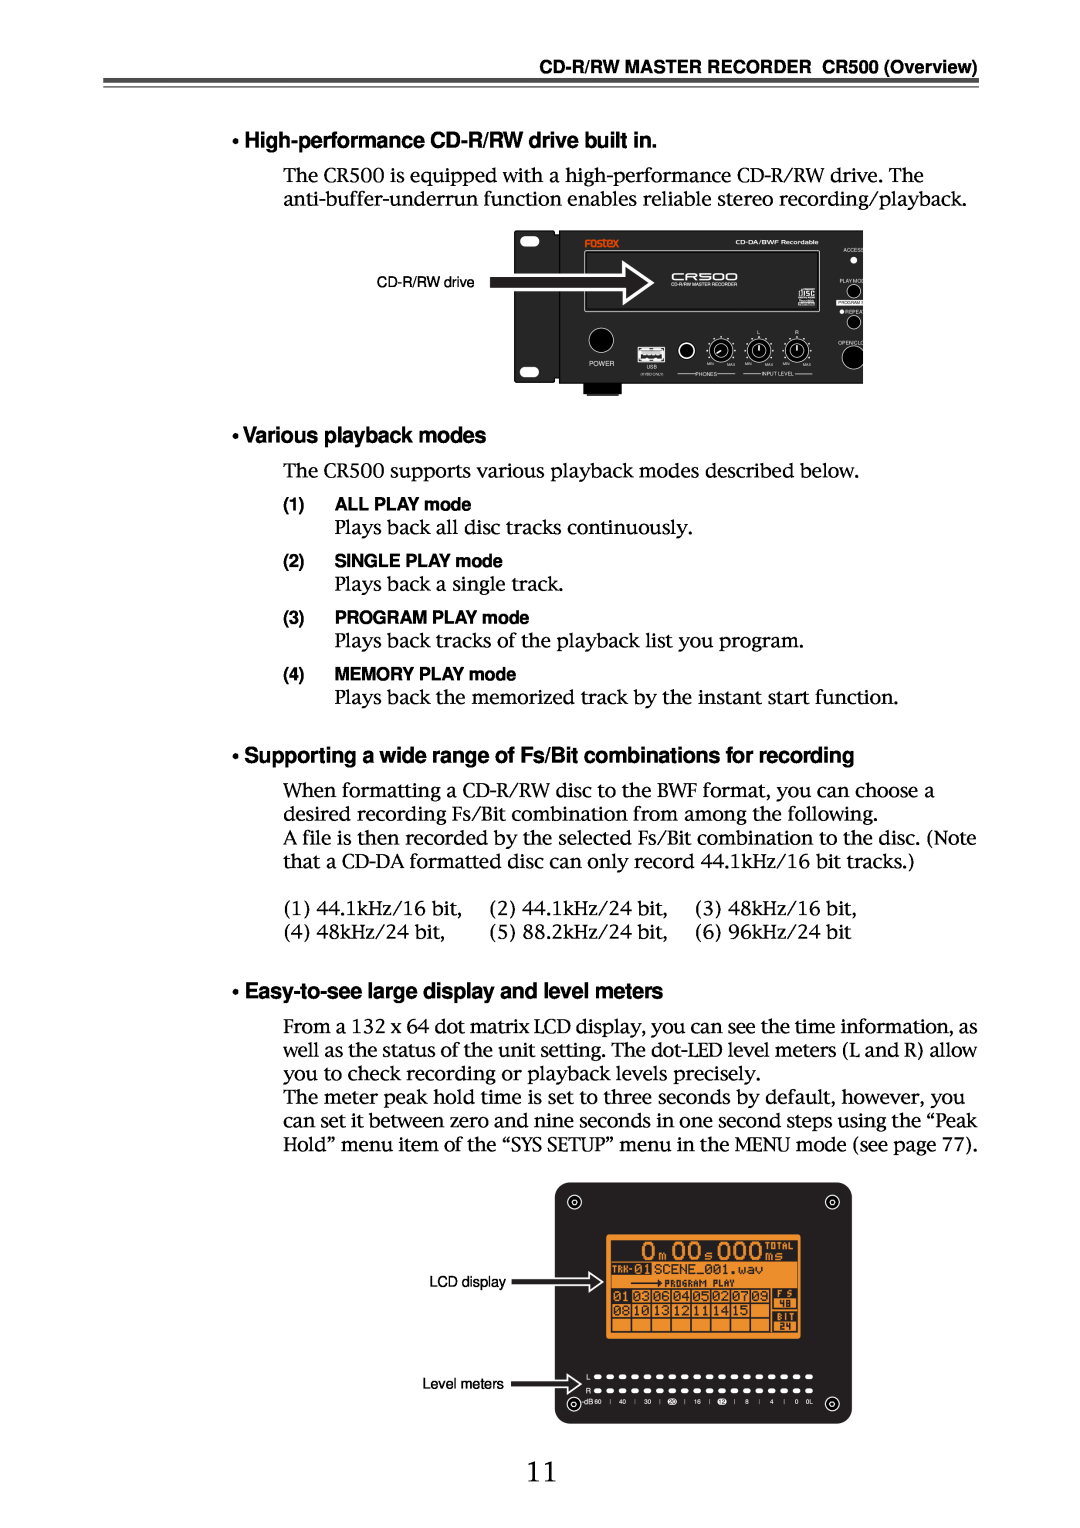 Fostex CR500 High-performance CD-R/RWdrive built in, • Various playback modes, • Easy-to-seelarge display and level meters 